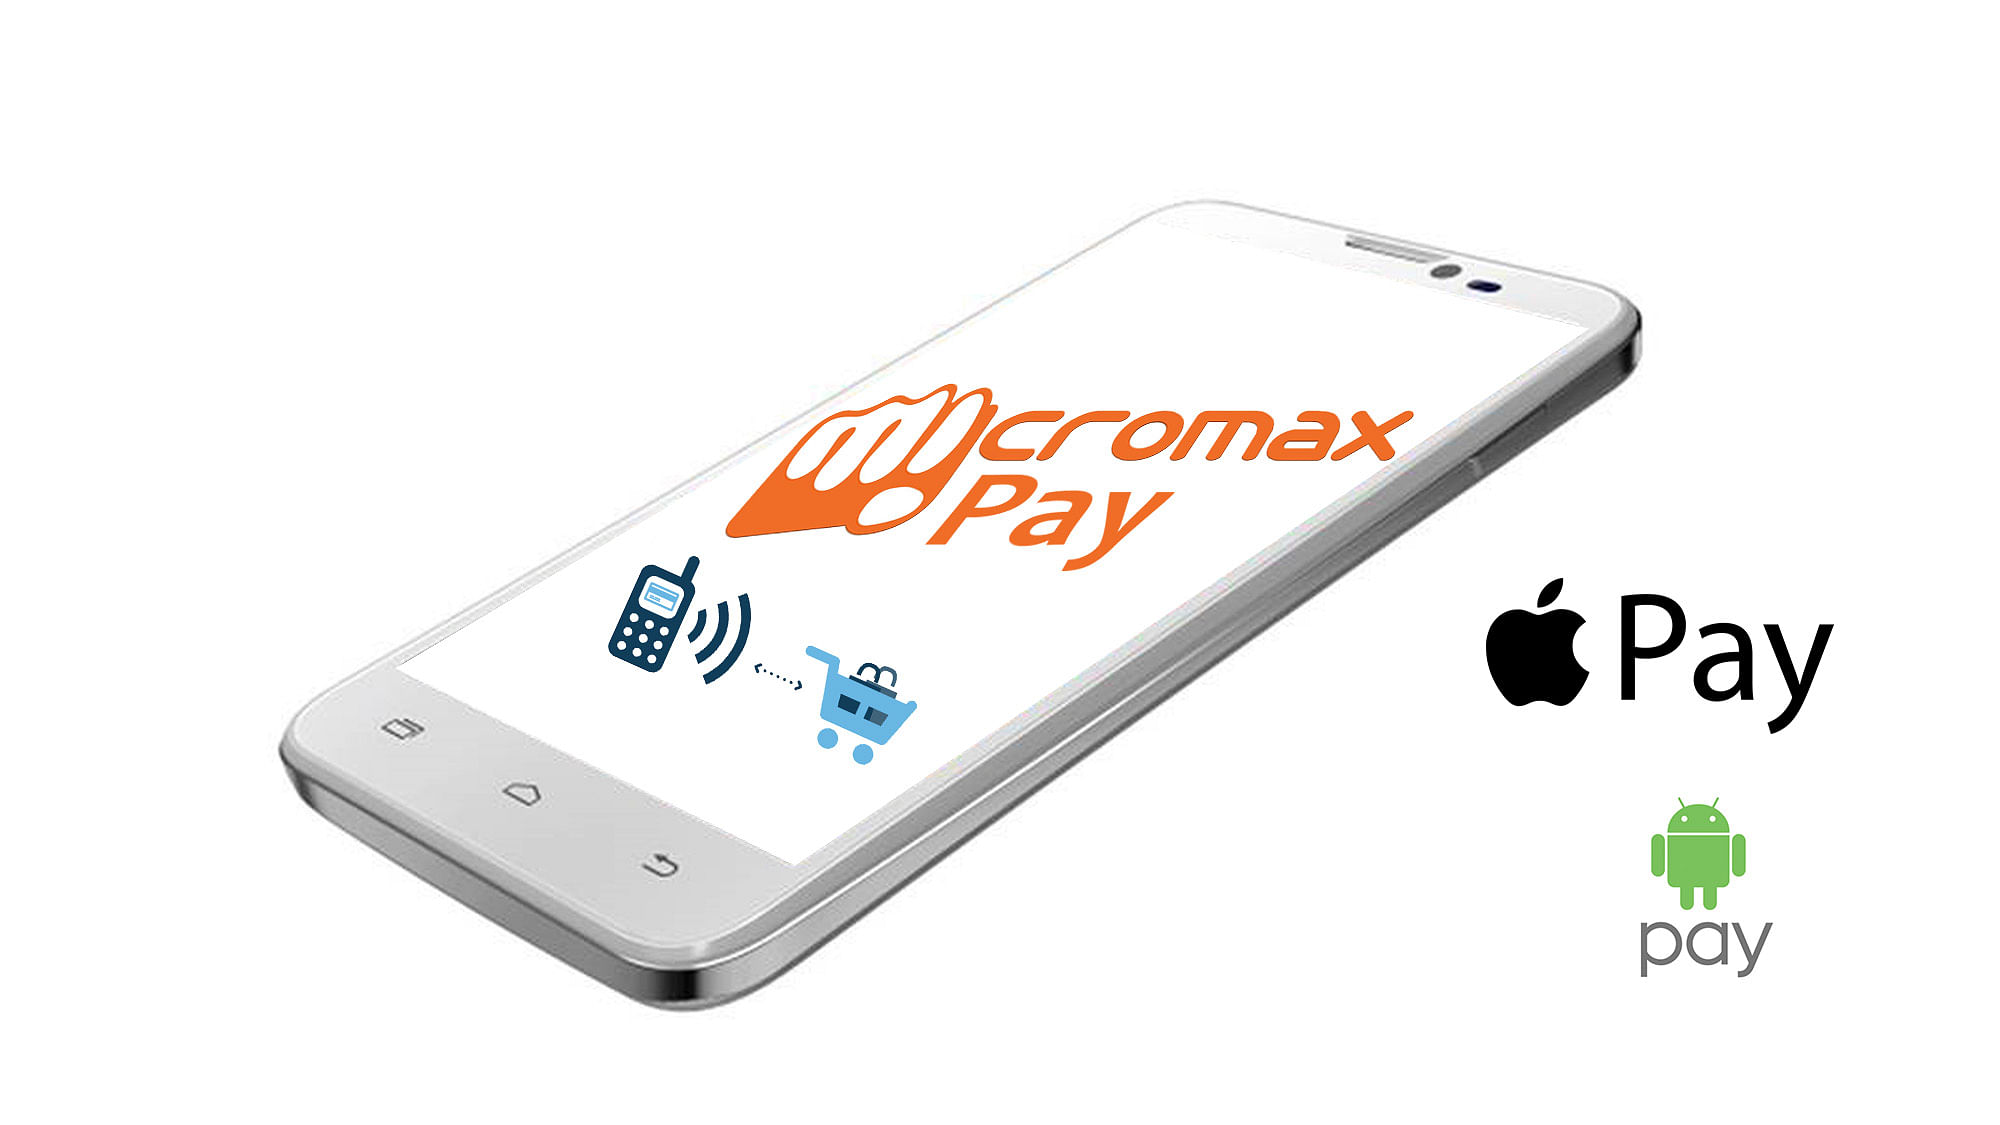 Micromax Pay could change the way payments are made in India. (Photo: <b>The Quint</b>)